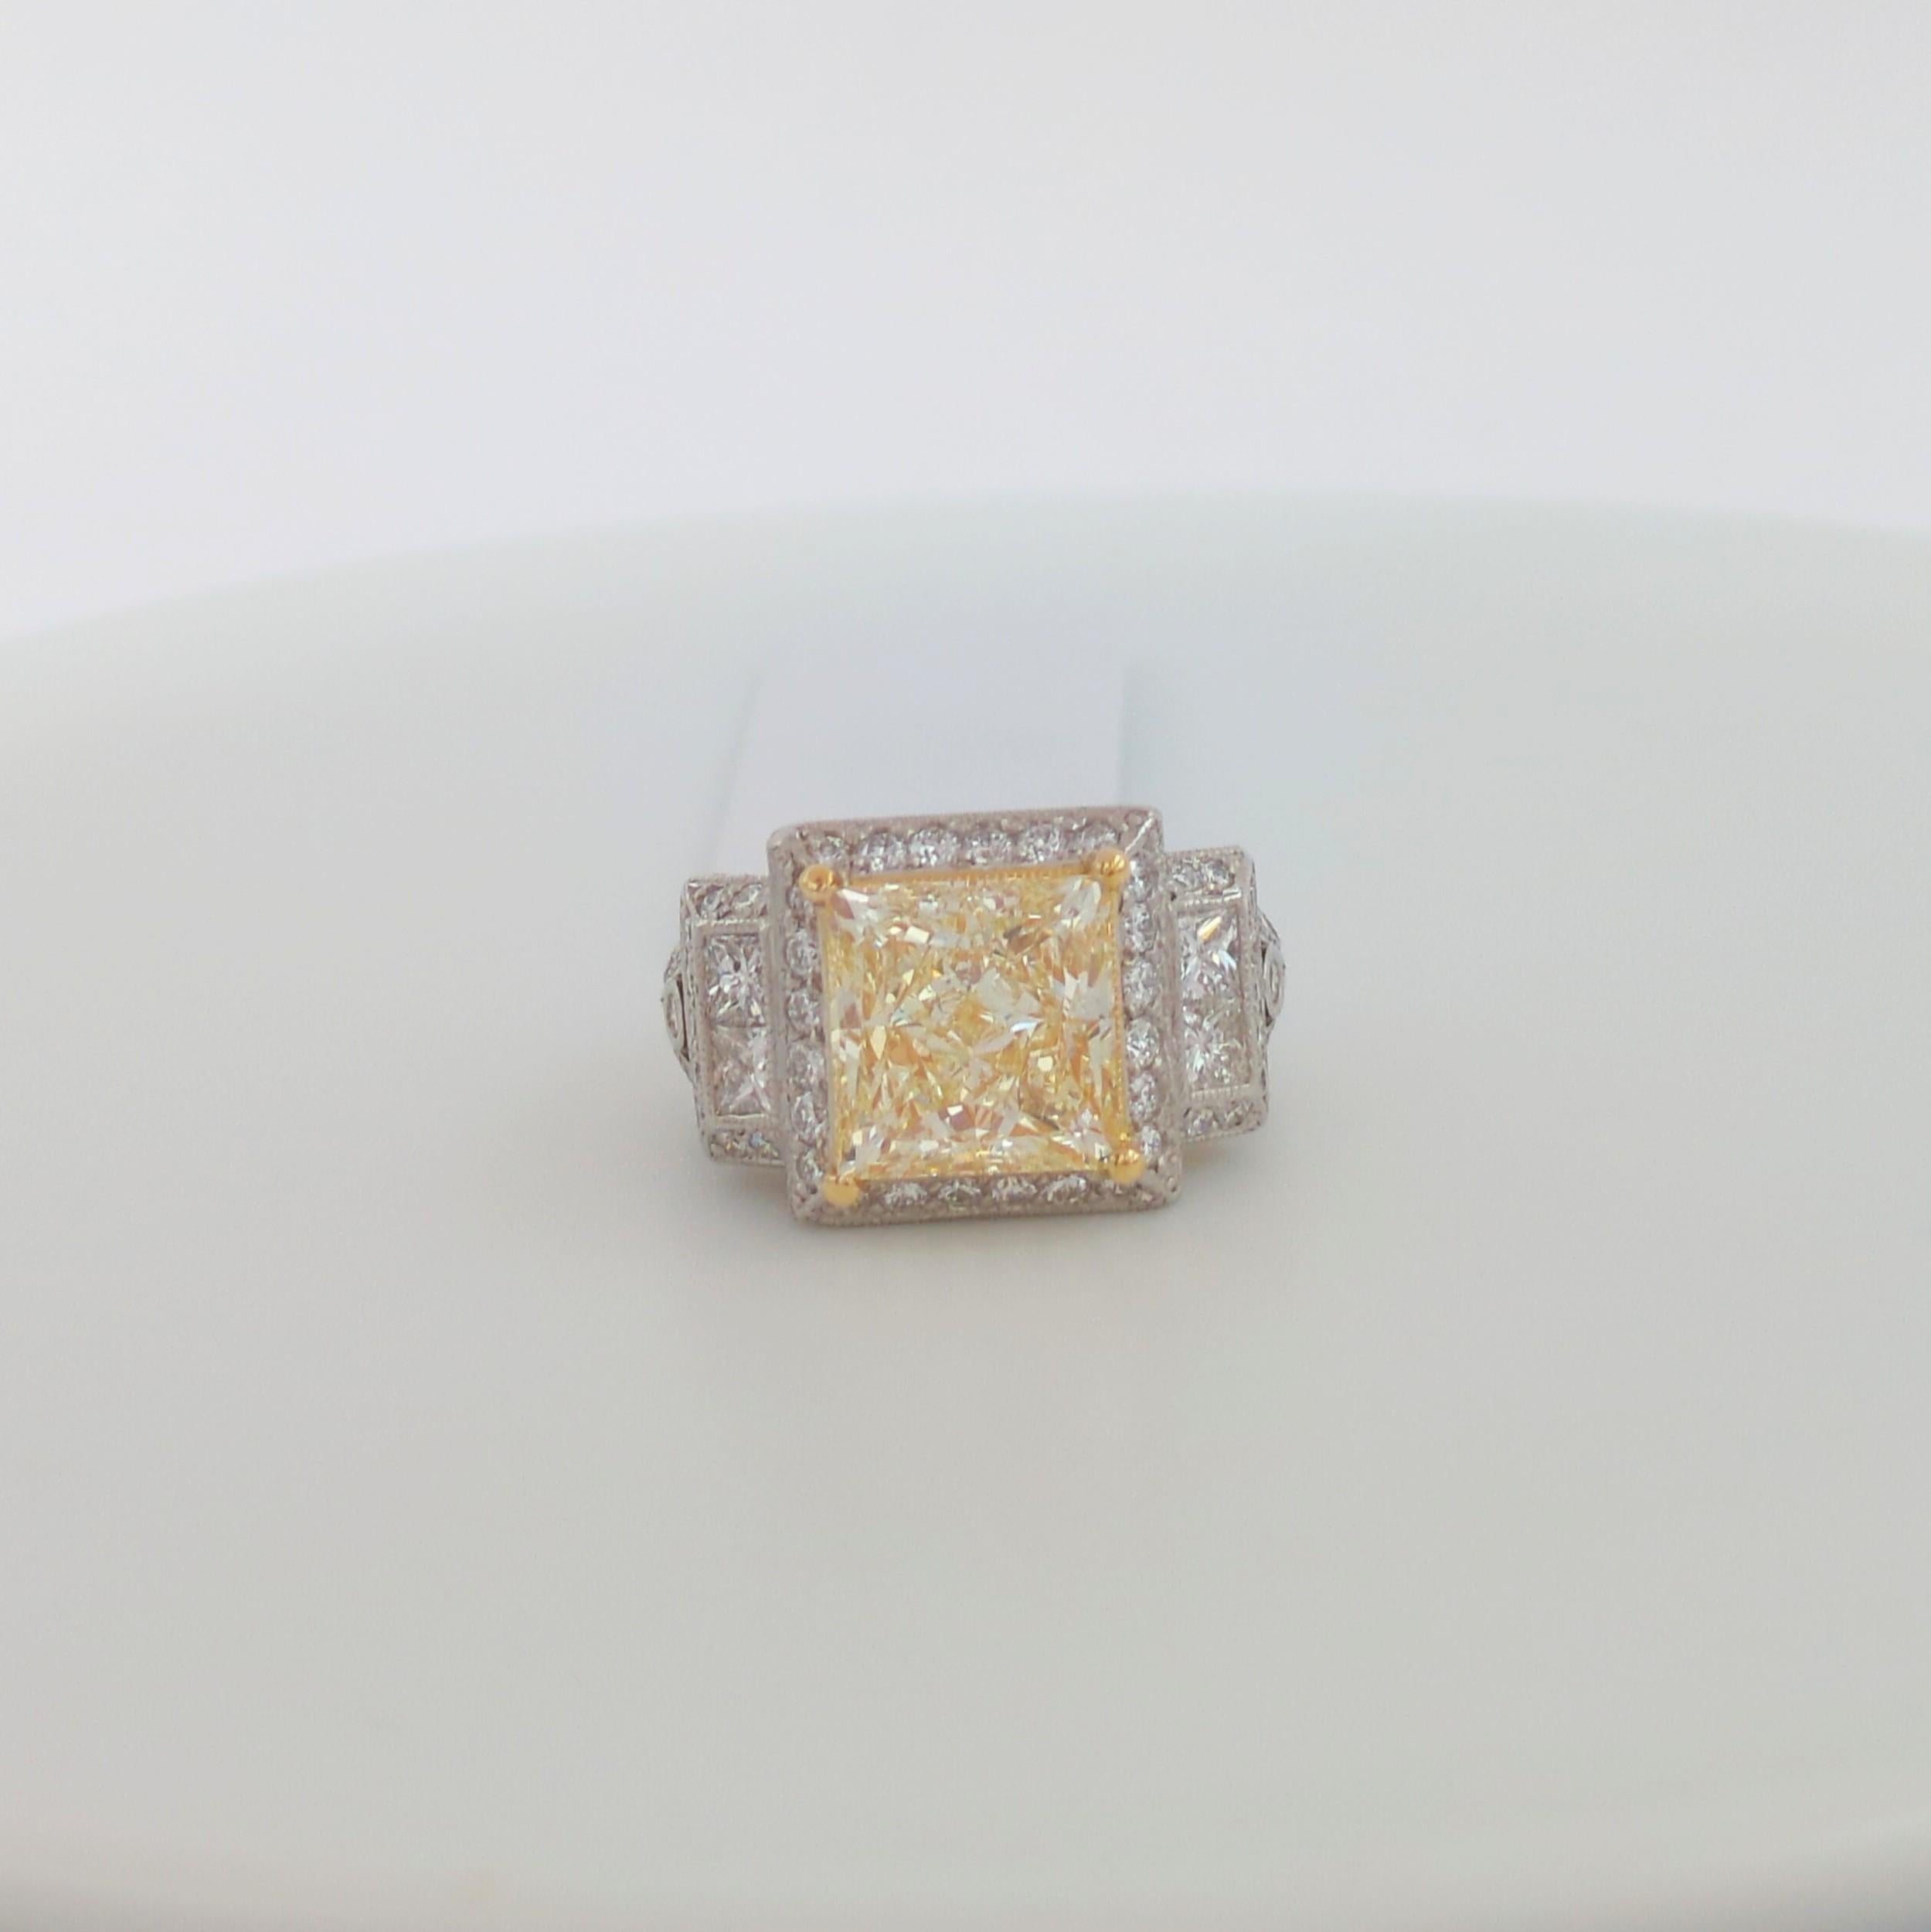 5 Carat Natural Yellow Diamond and White Diamond Ring in 14K 2Tone Gold For Sale 3